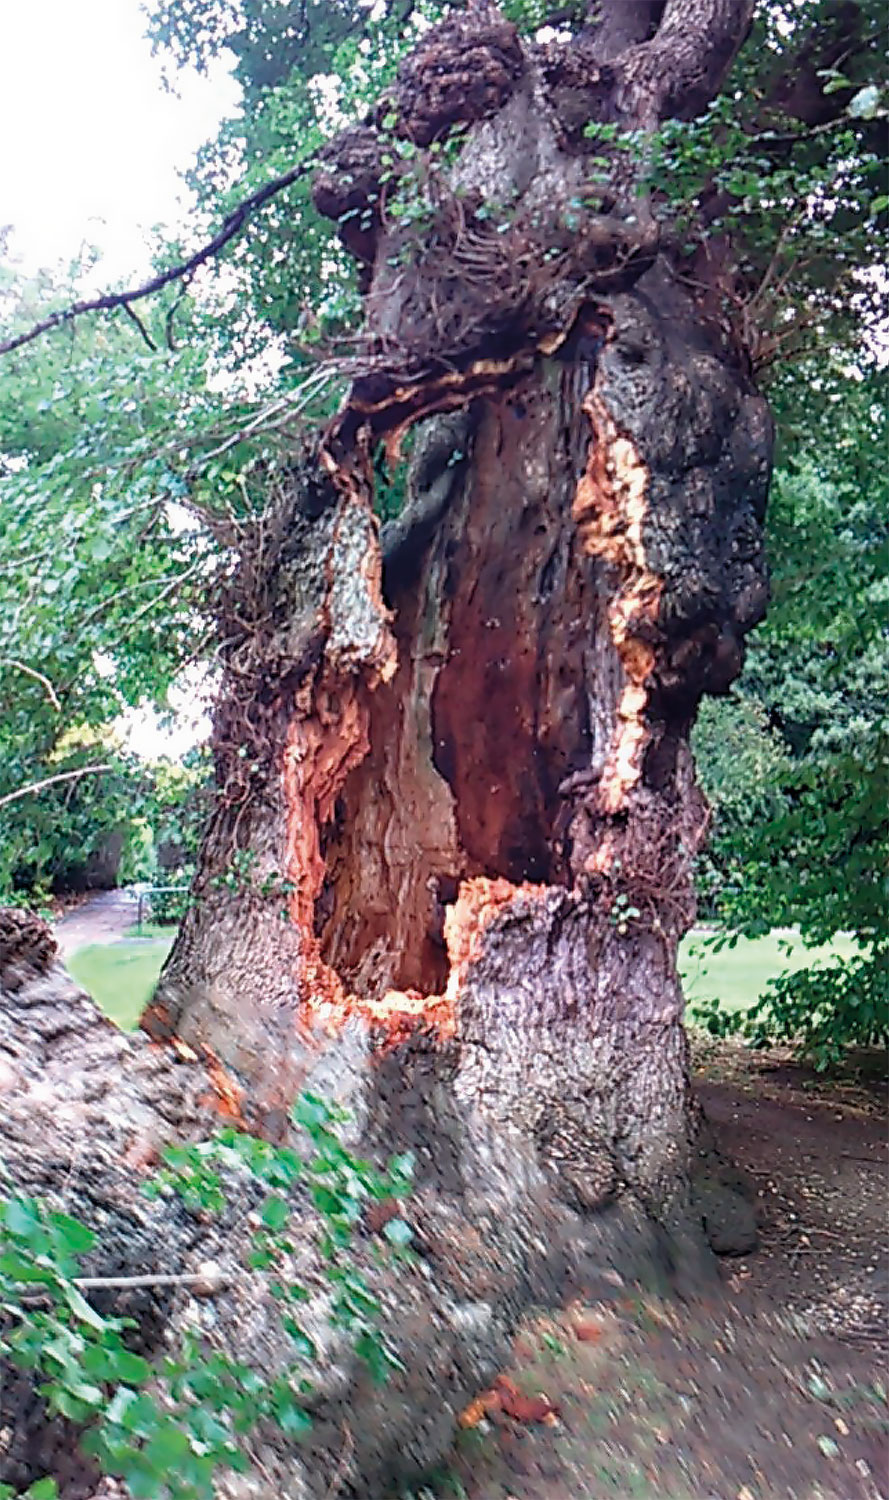 The East Tree in 2017 when it received major wind damage after a storm. This tree is now dying of Dutch elm disease.